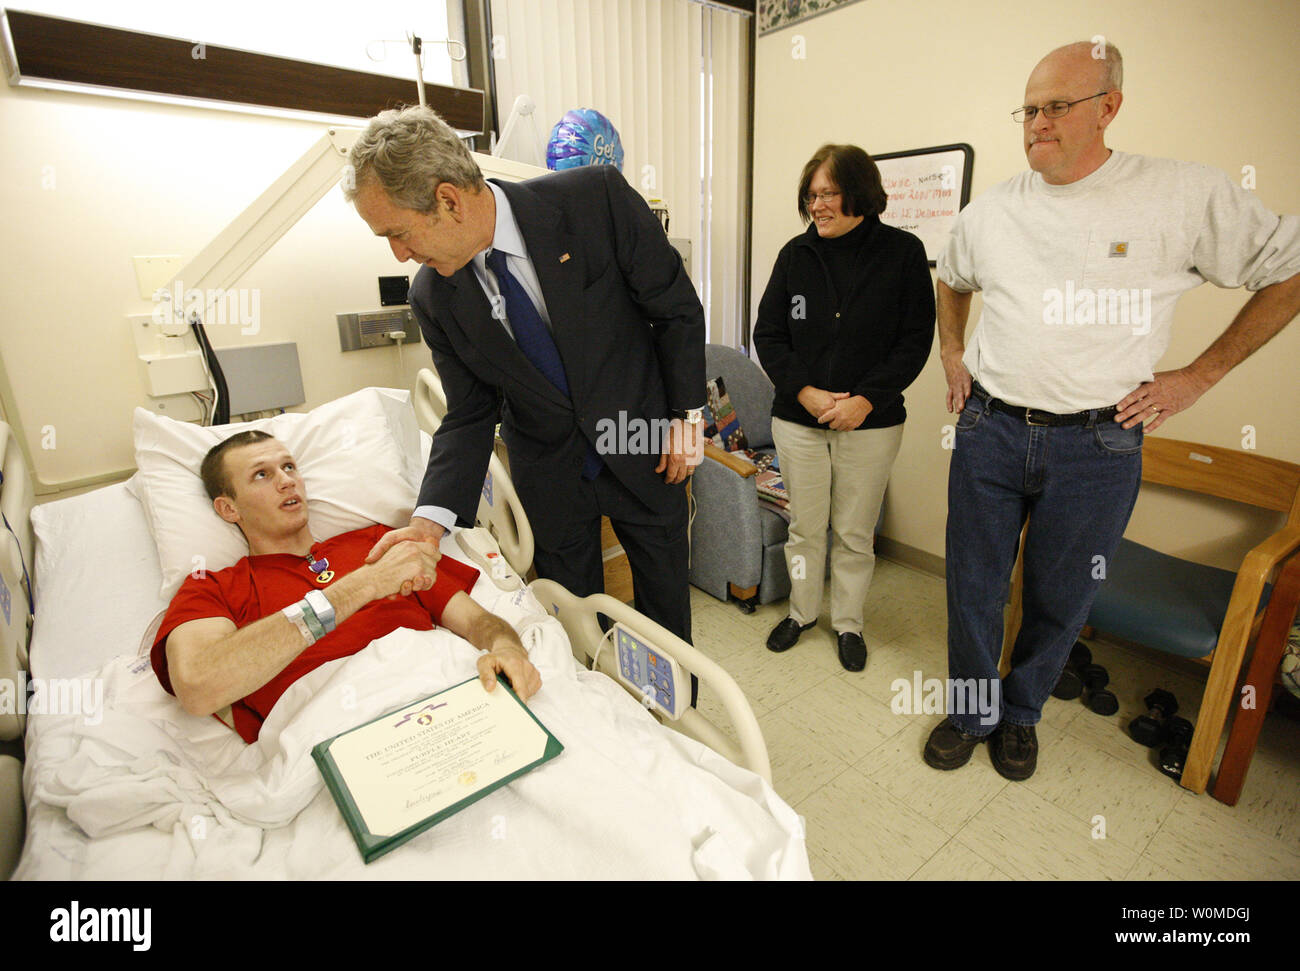 President George W. Bush shakes the hand of U.S. Army PFC Lukas Shook of Strafford, Missouri, after presenting him with a Purple Heart on December 22, 2008, during a visit to Walter Reed Army Medical Center in Washington D.C., where the soldier is recovering from injuries received in the war in Iraq.  Looking on his PFC Shook's mother and father,  Dennis and Cynthia Shook.   (UPI Photo/Eric Draper/White House) Stock Photo